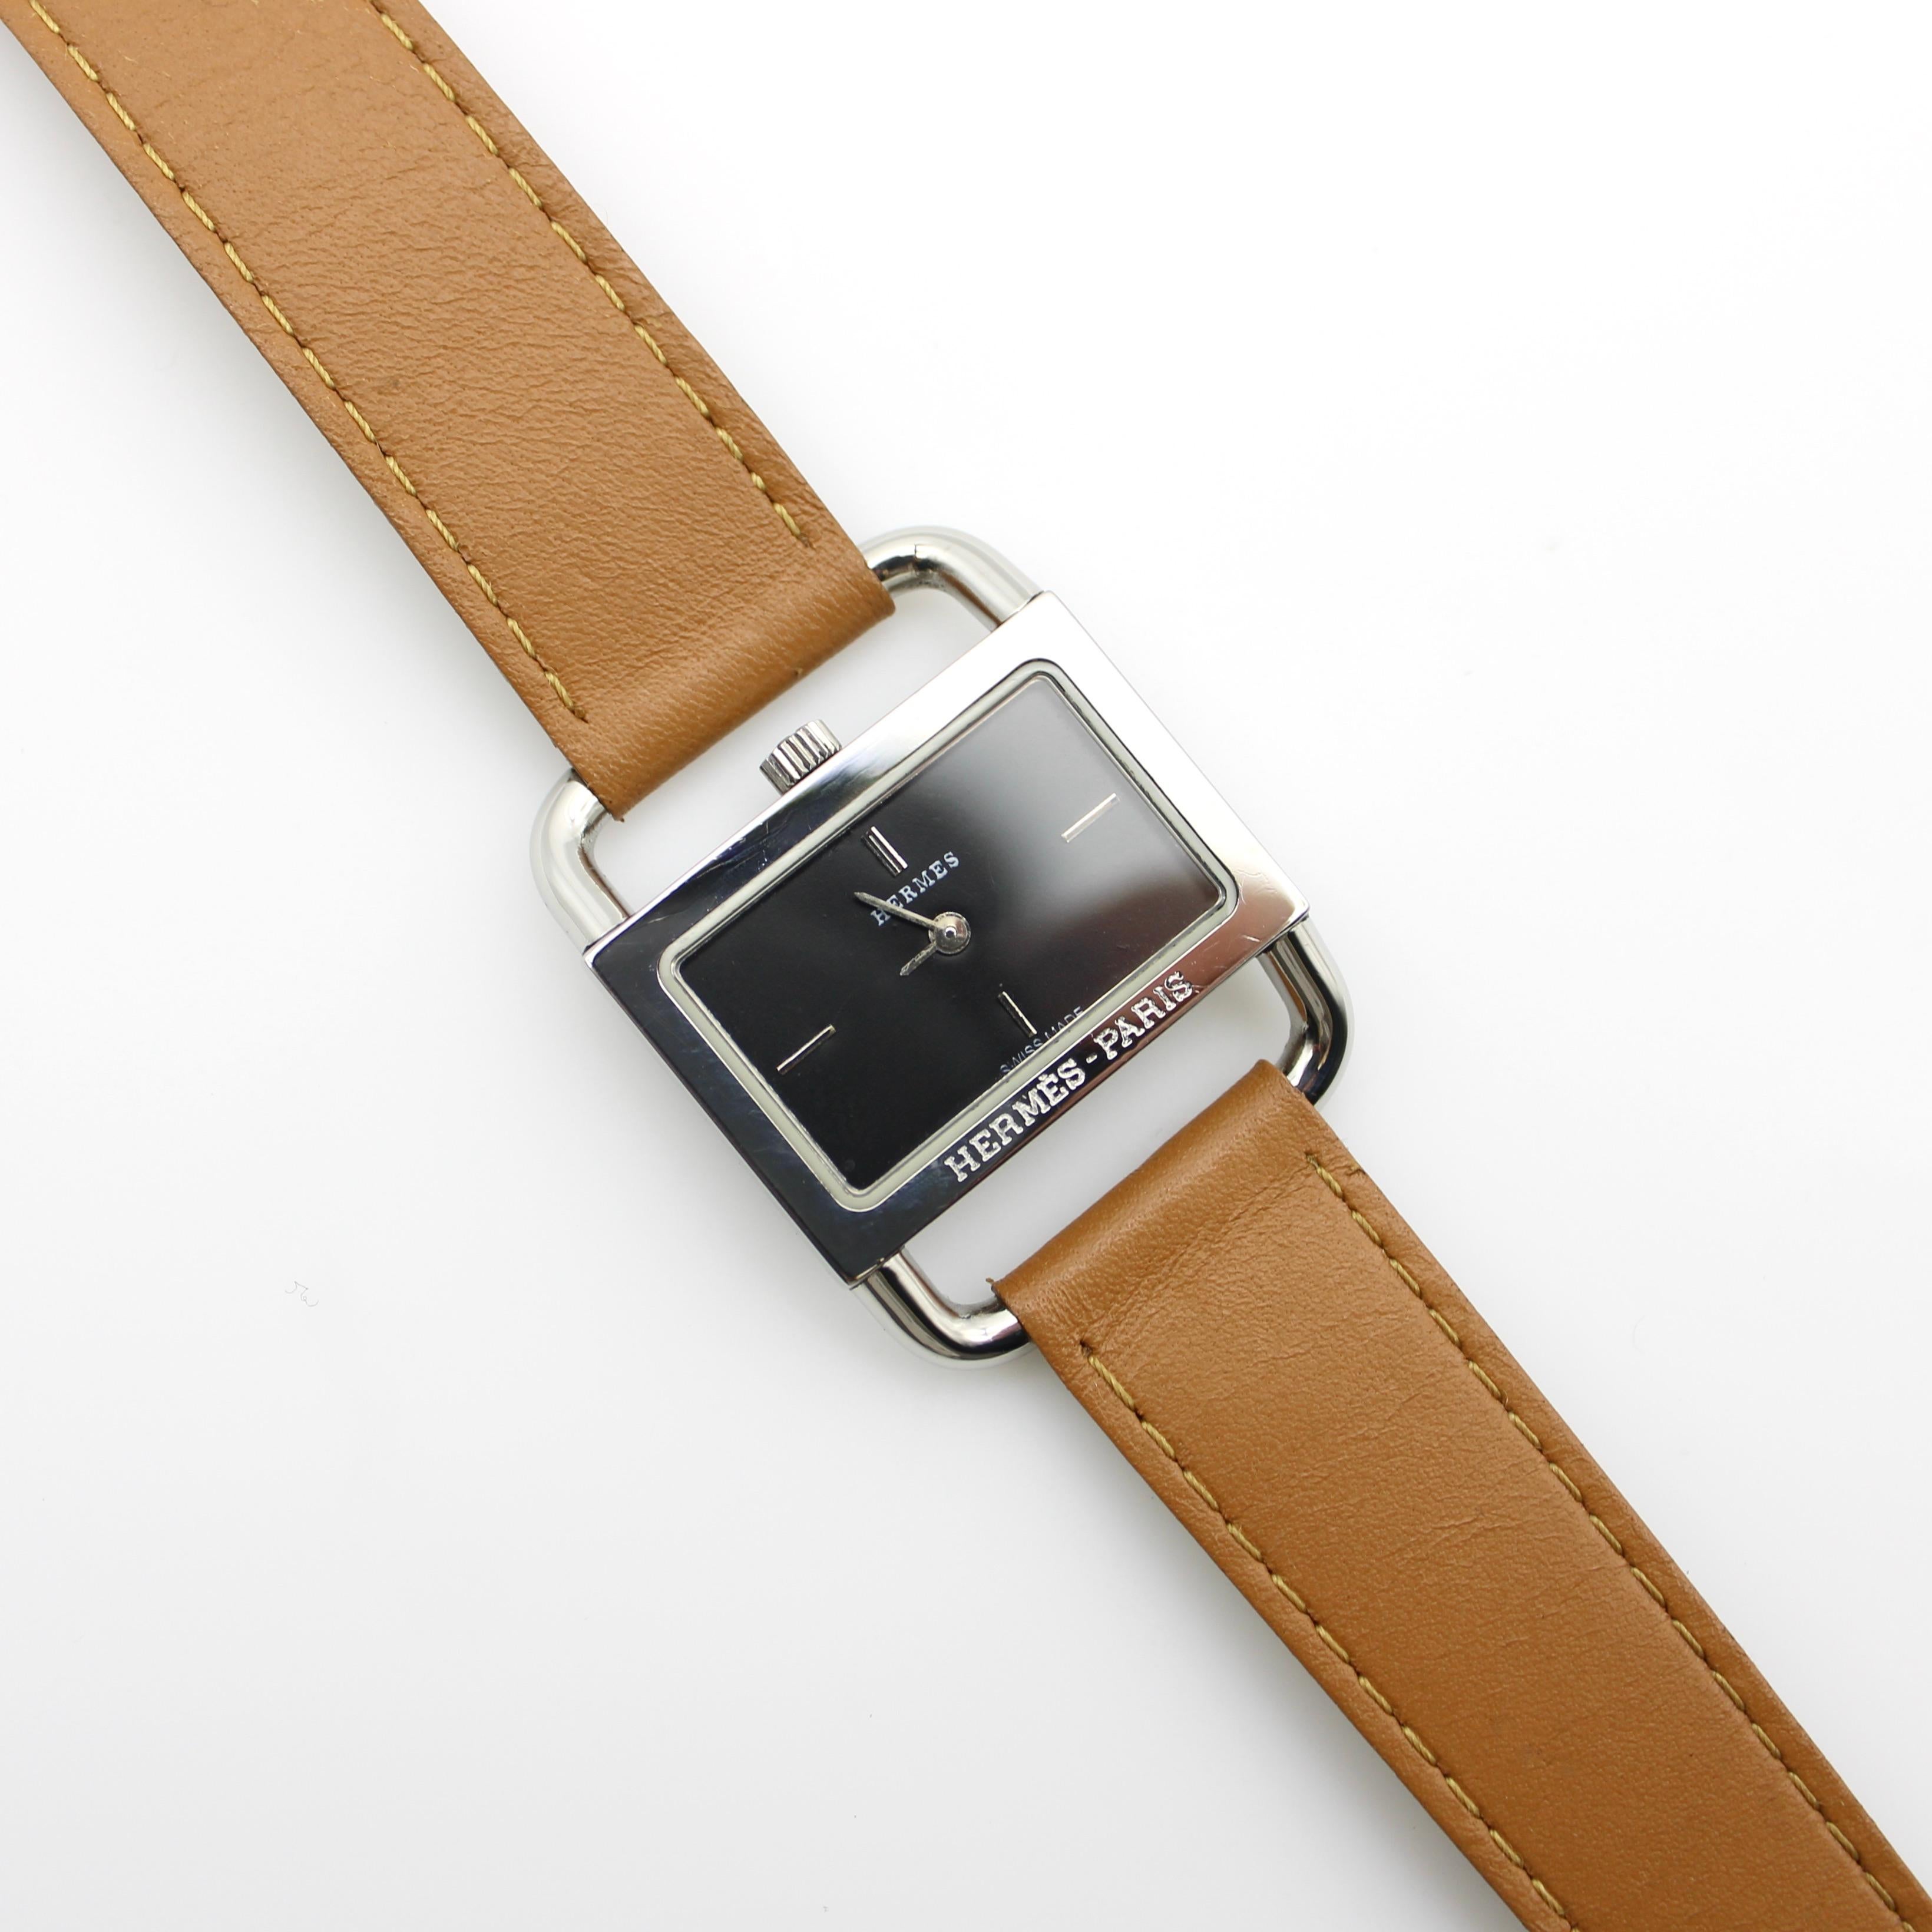 An elegant vintage Parisian-made Hermès wrist watch with quartz battery movement, circa 1980. The watch’s minimal style is refined, with four simple lines at noon, 3, 6, and 9 to denote the time. The exterior of the watch is stainless steel, which